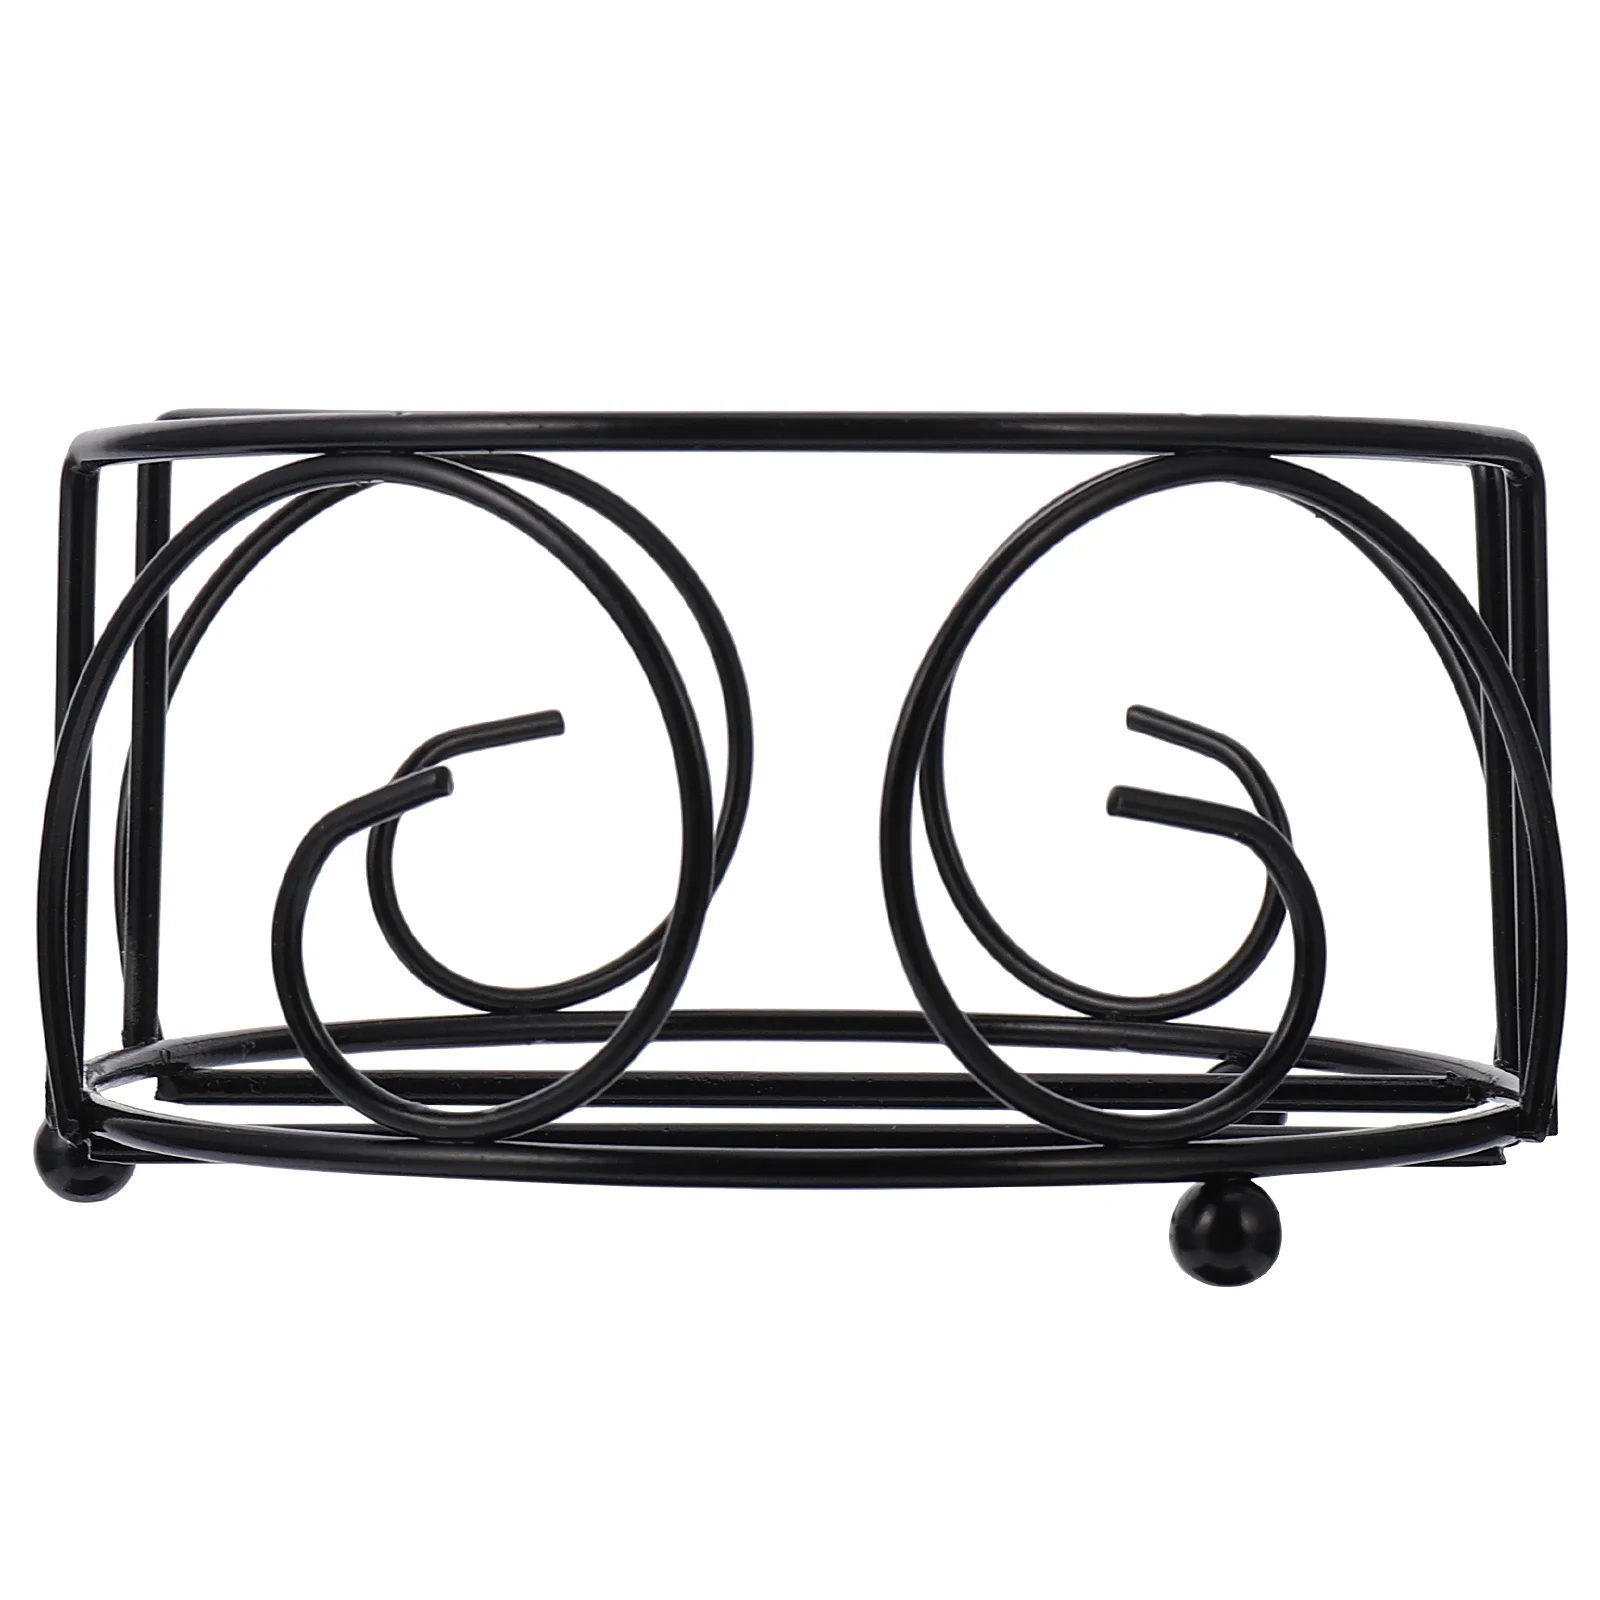 

Coaster Holder Rack Round Iron Stand Metal Drink Coasters Cup Mat Tray Storage Black Holders Without Organizer Kitchen Gadget